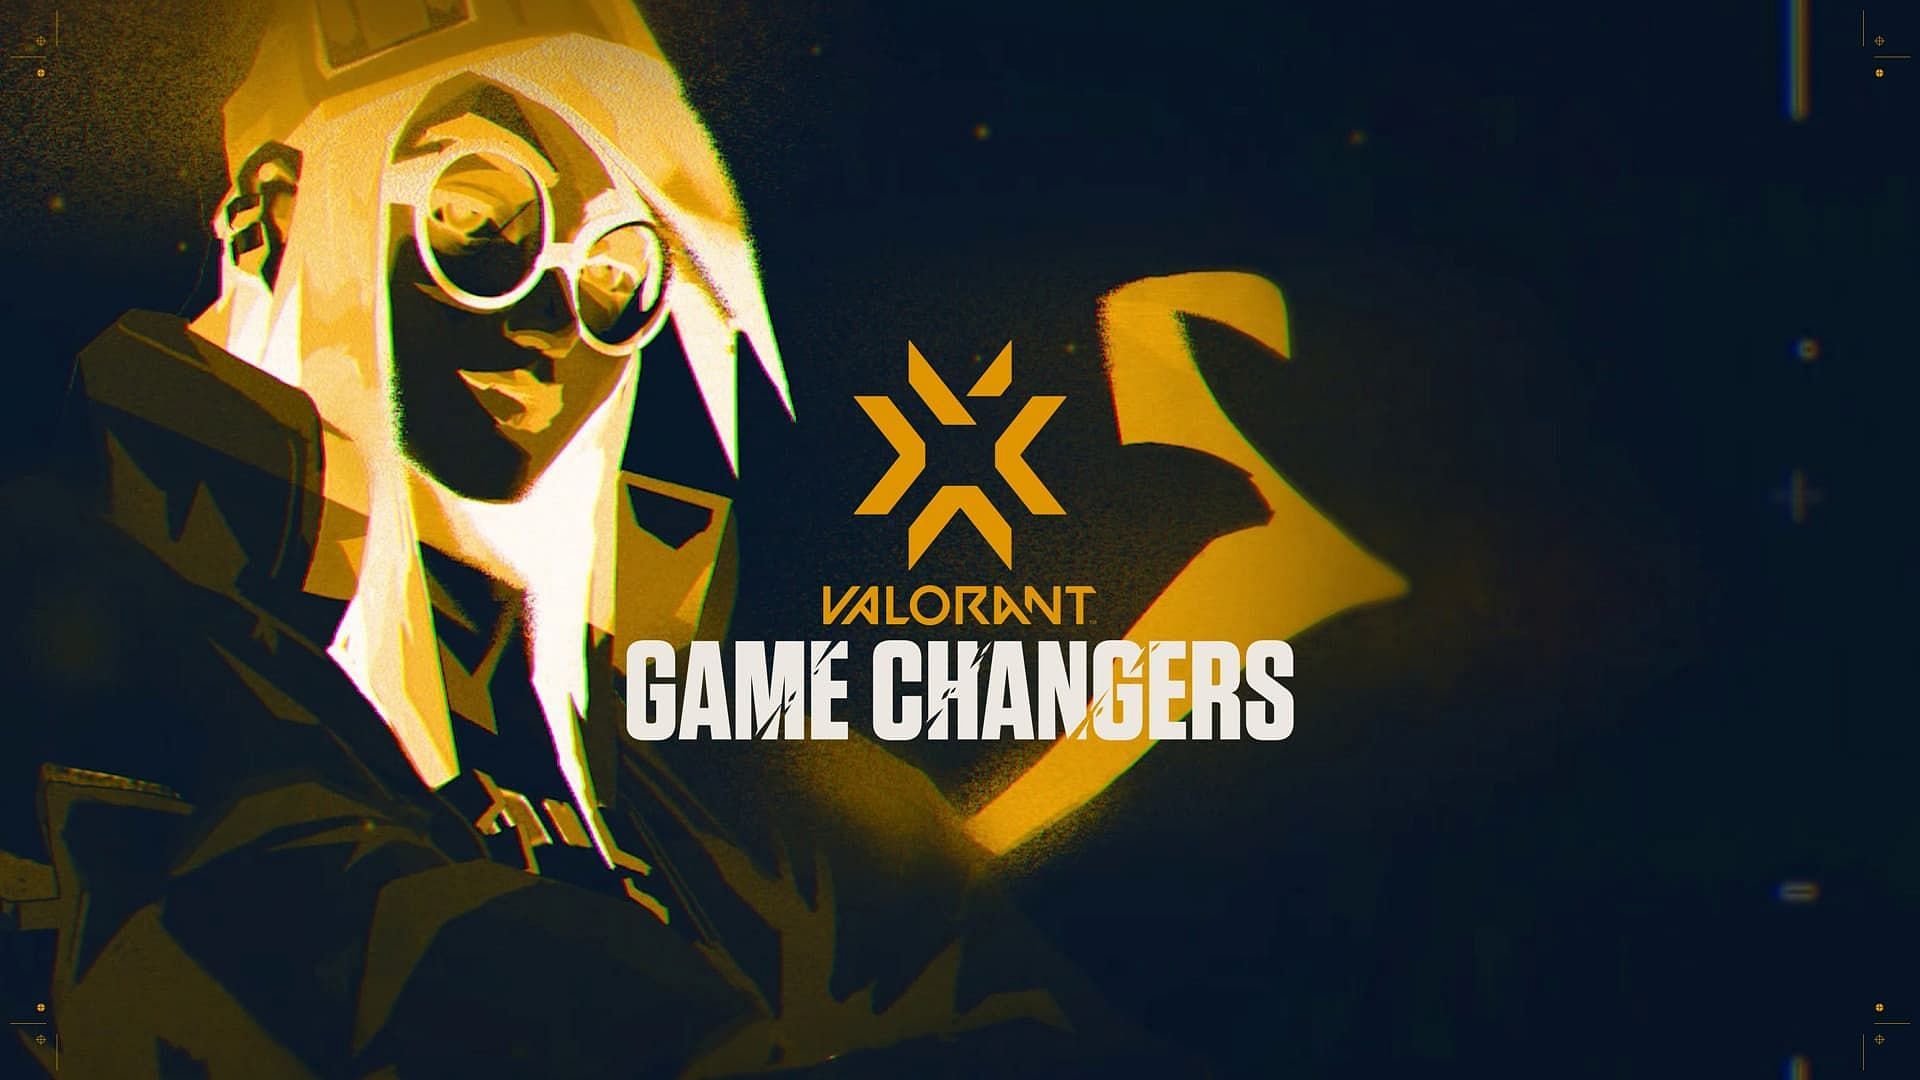 An individual was caught cheating in a recent Valorant Game Changers tournament (Image via Riot Games)